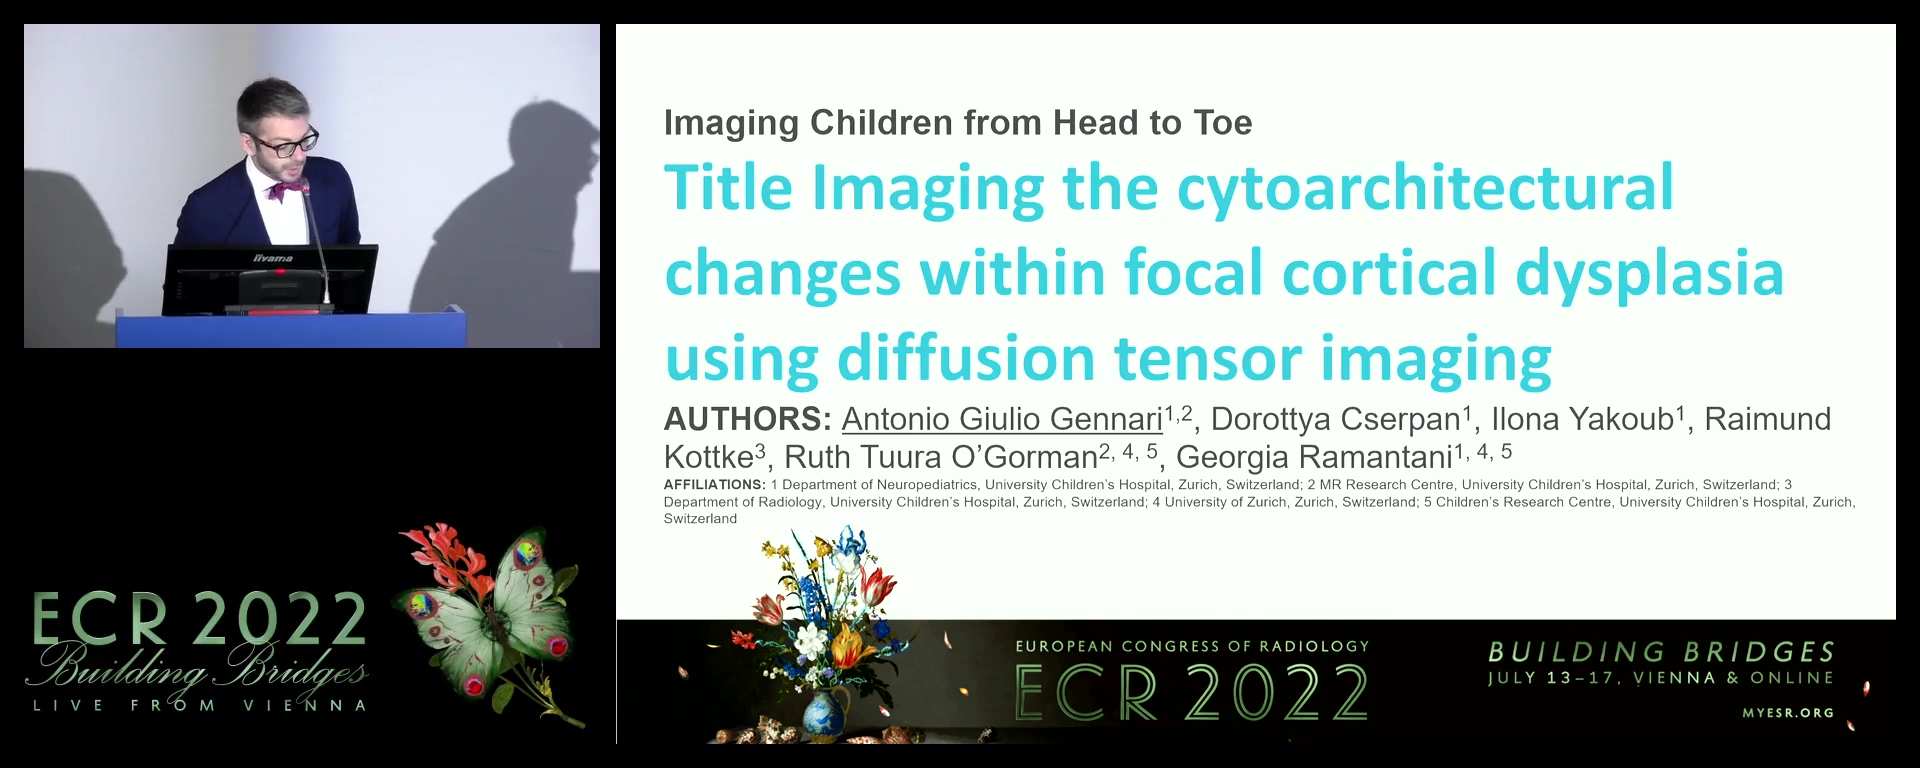 Imaging cytoarchitectural changes within focal cortical dysplasia using diffusion tensor imaging - Antonio Giulio Gennari, Zurich / IT